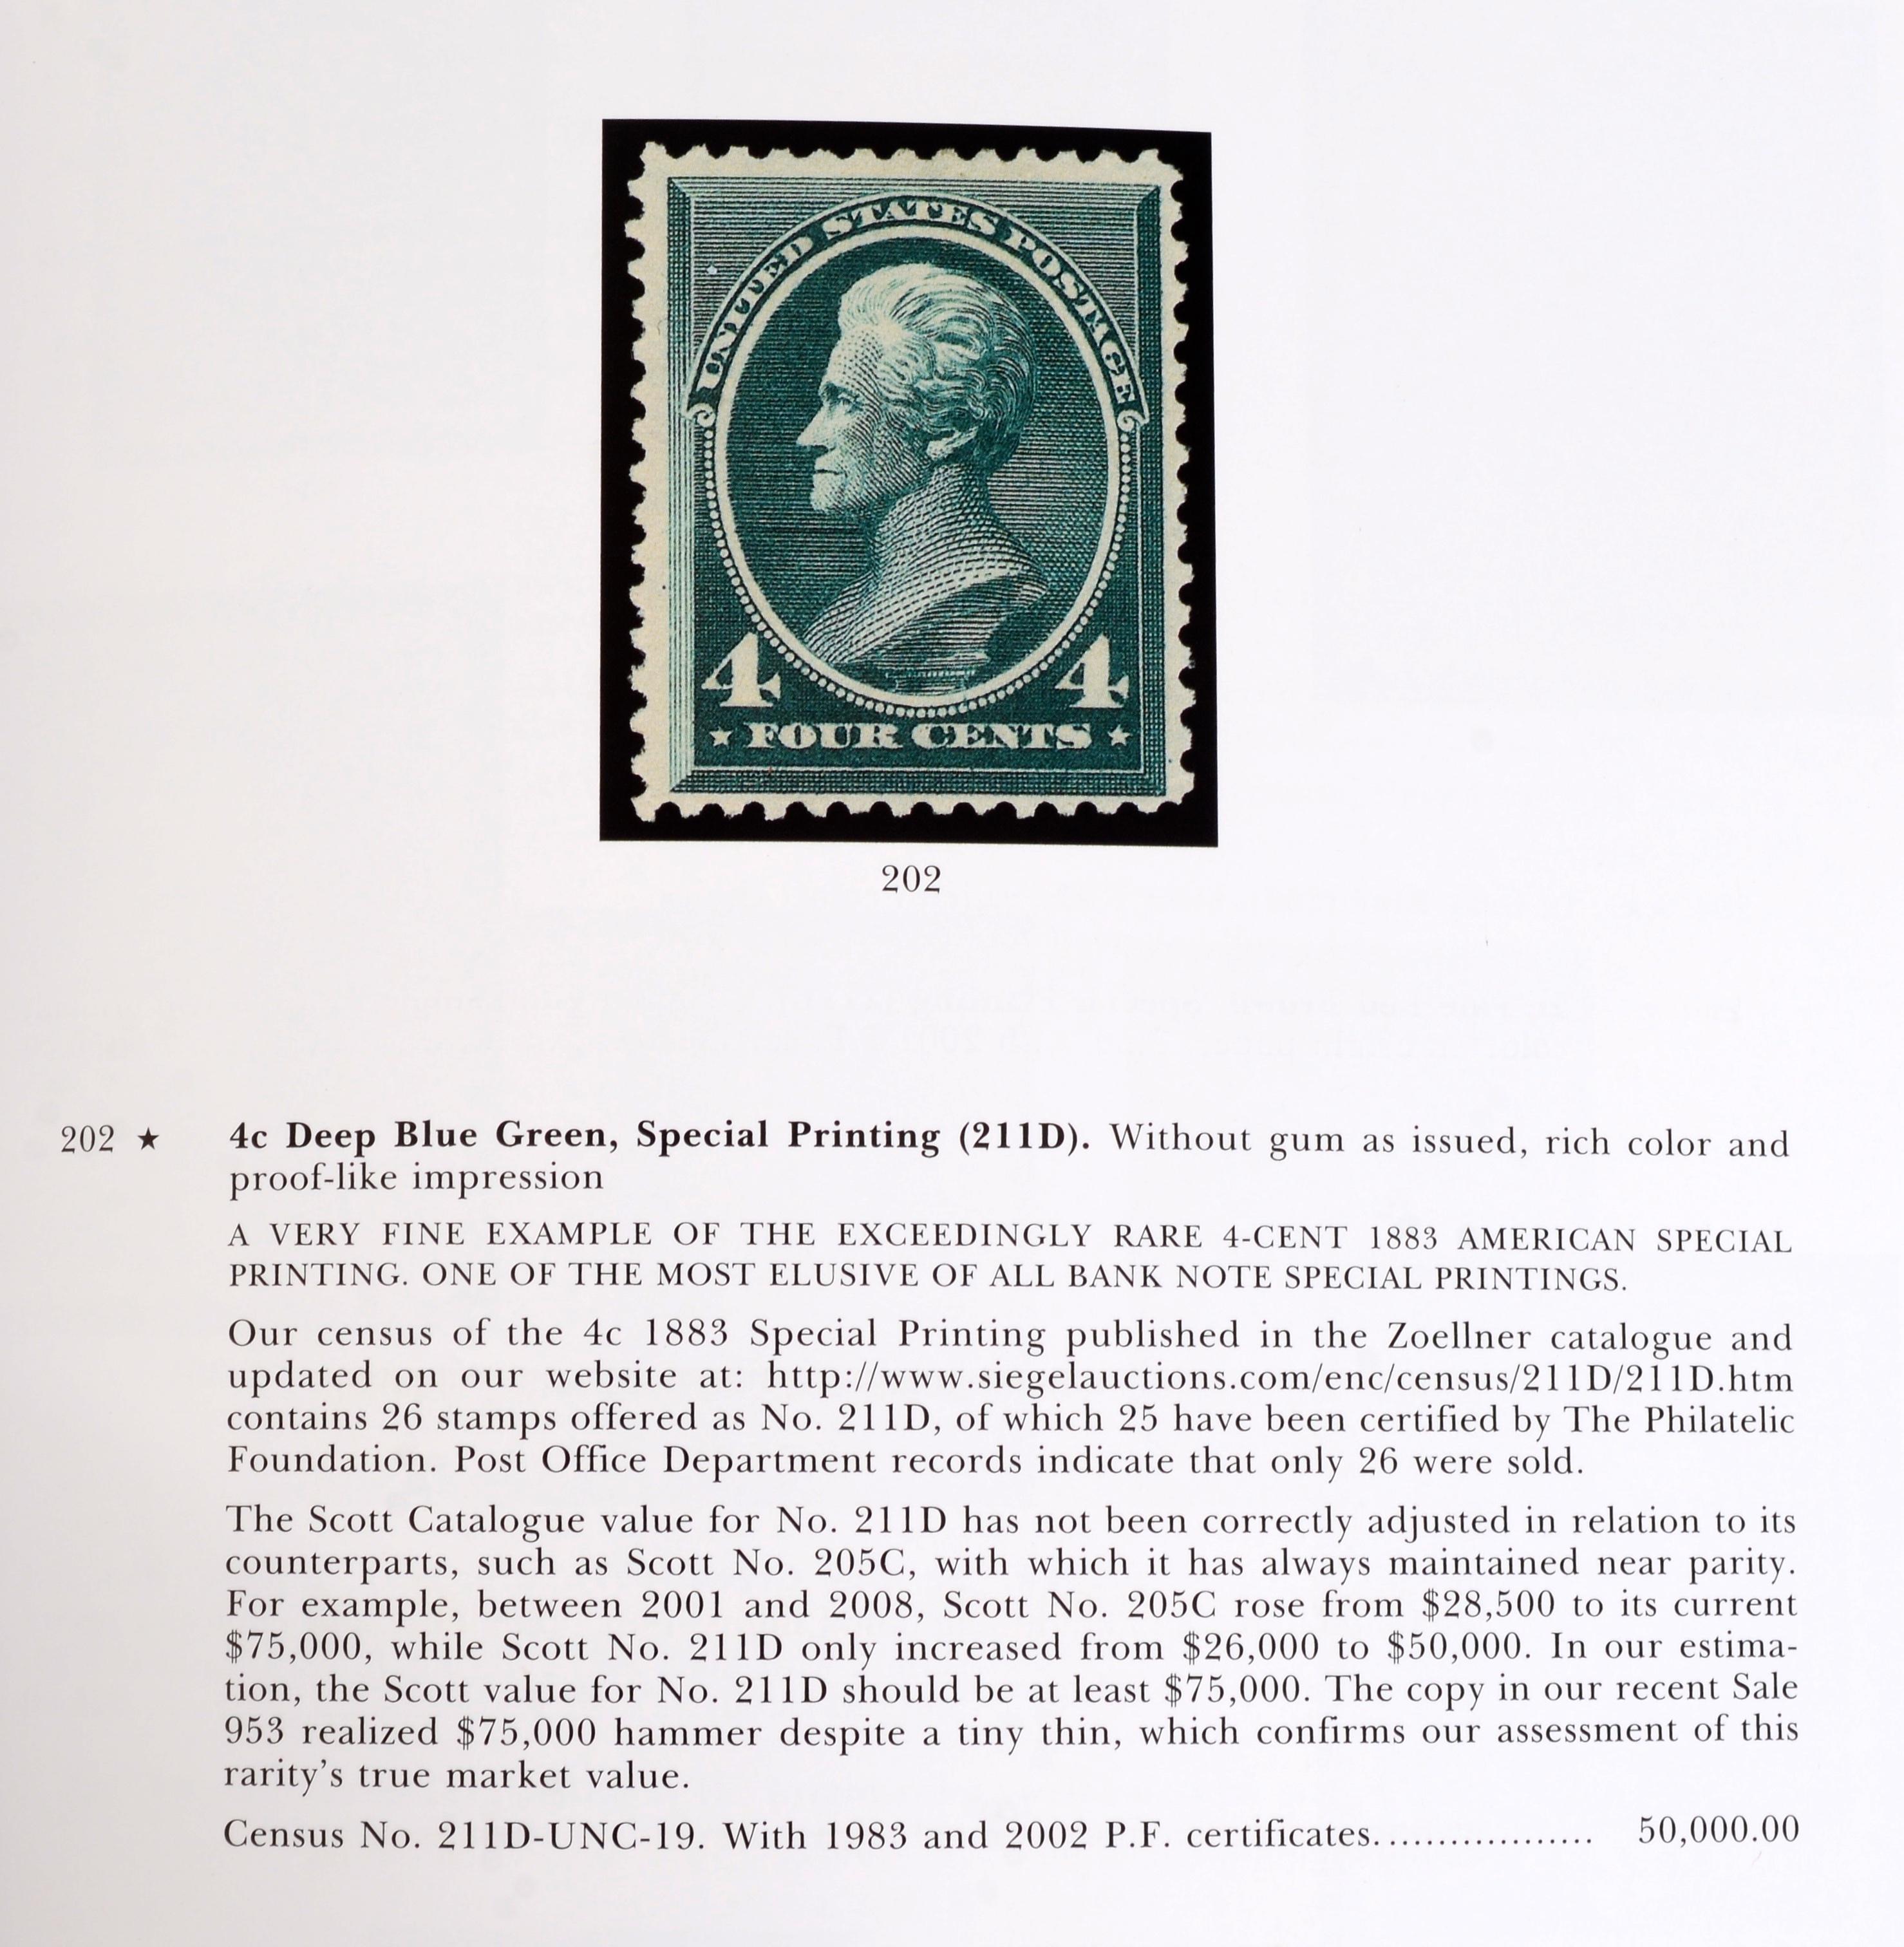 American The Jay Hoffman Collection of United States Stamps: by Robert A. Siegel Auction  For Sale